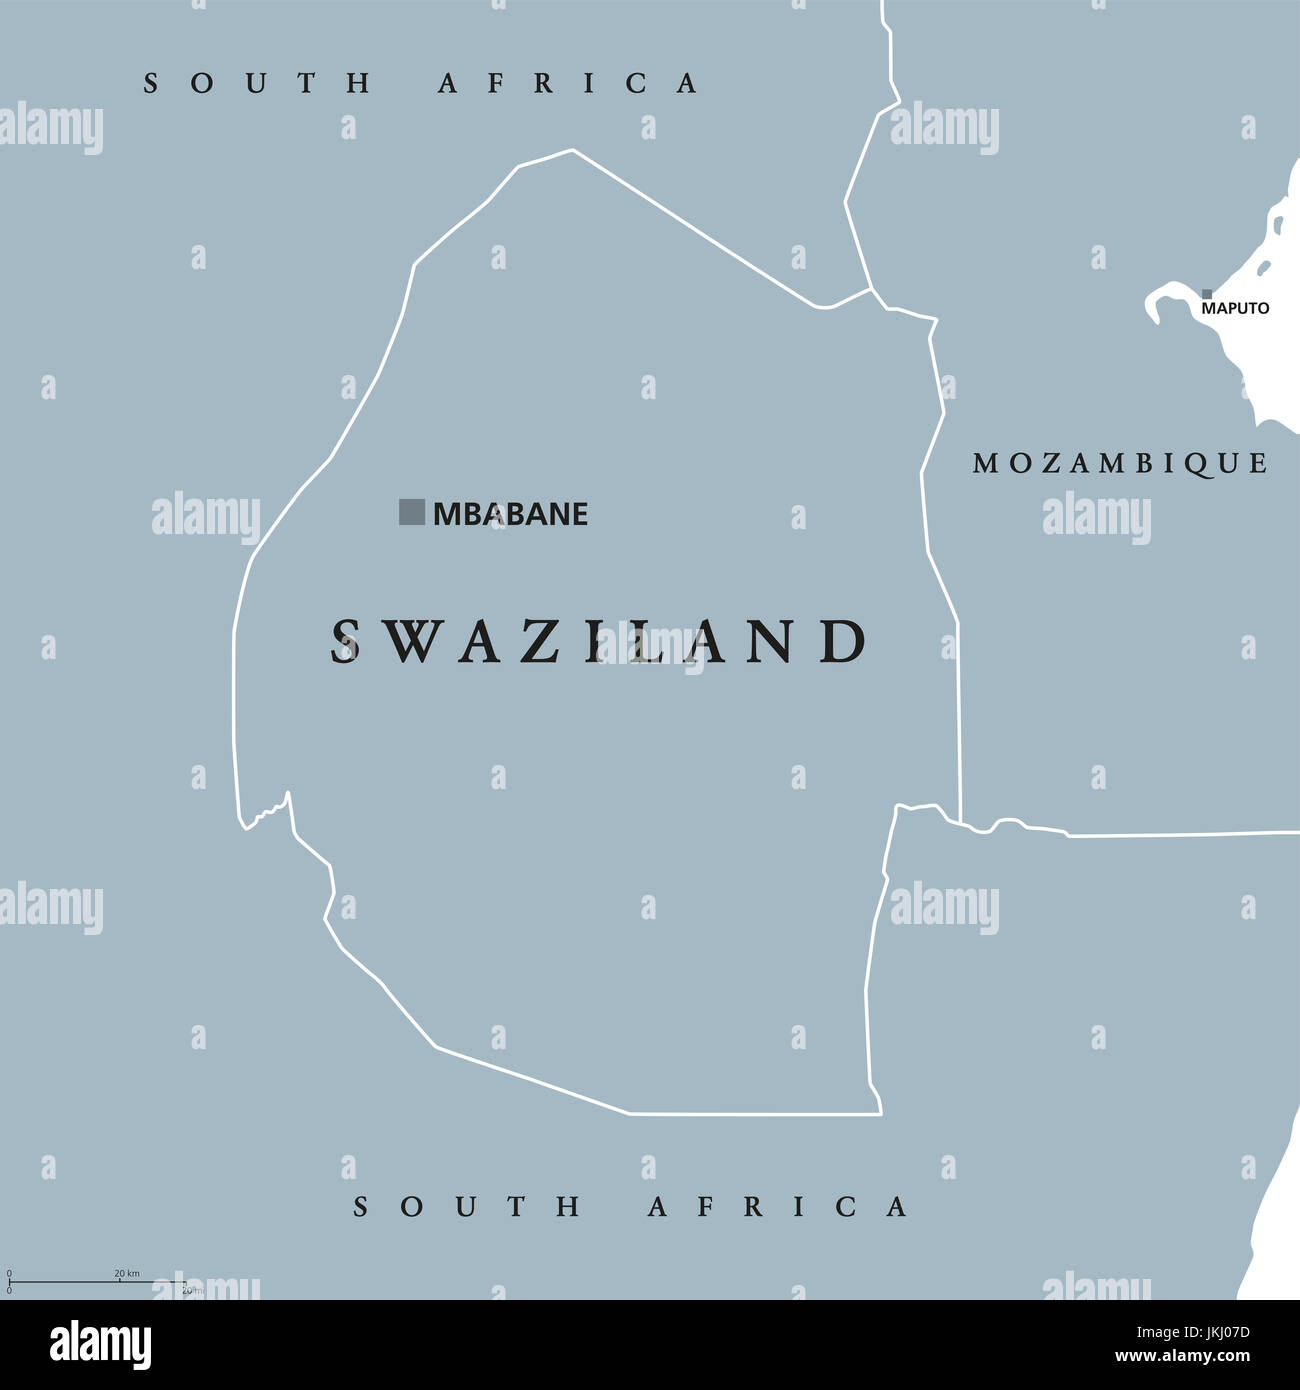 Swaziland political map with capital Mbabane. Kingdom of Eswatini, sometimes called Kangwane. Sovereign state and landlocked country in South Africa. Stock Photo